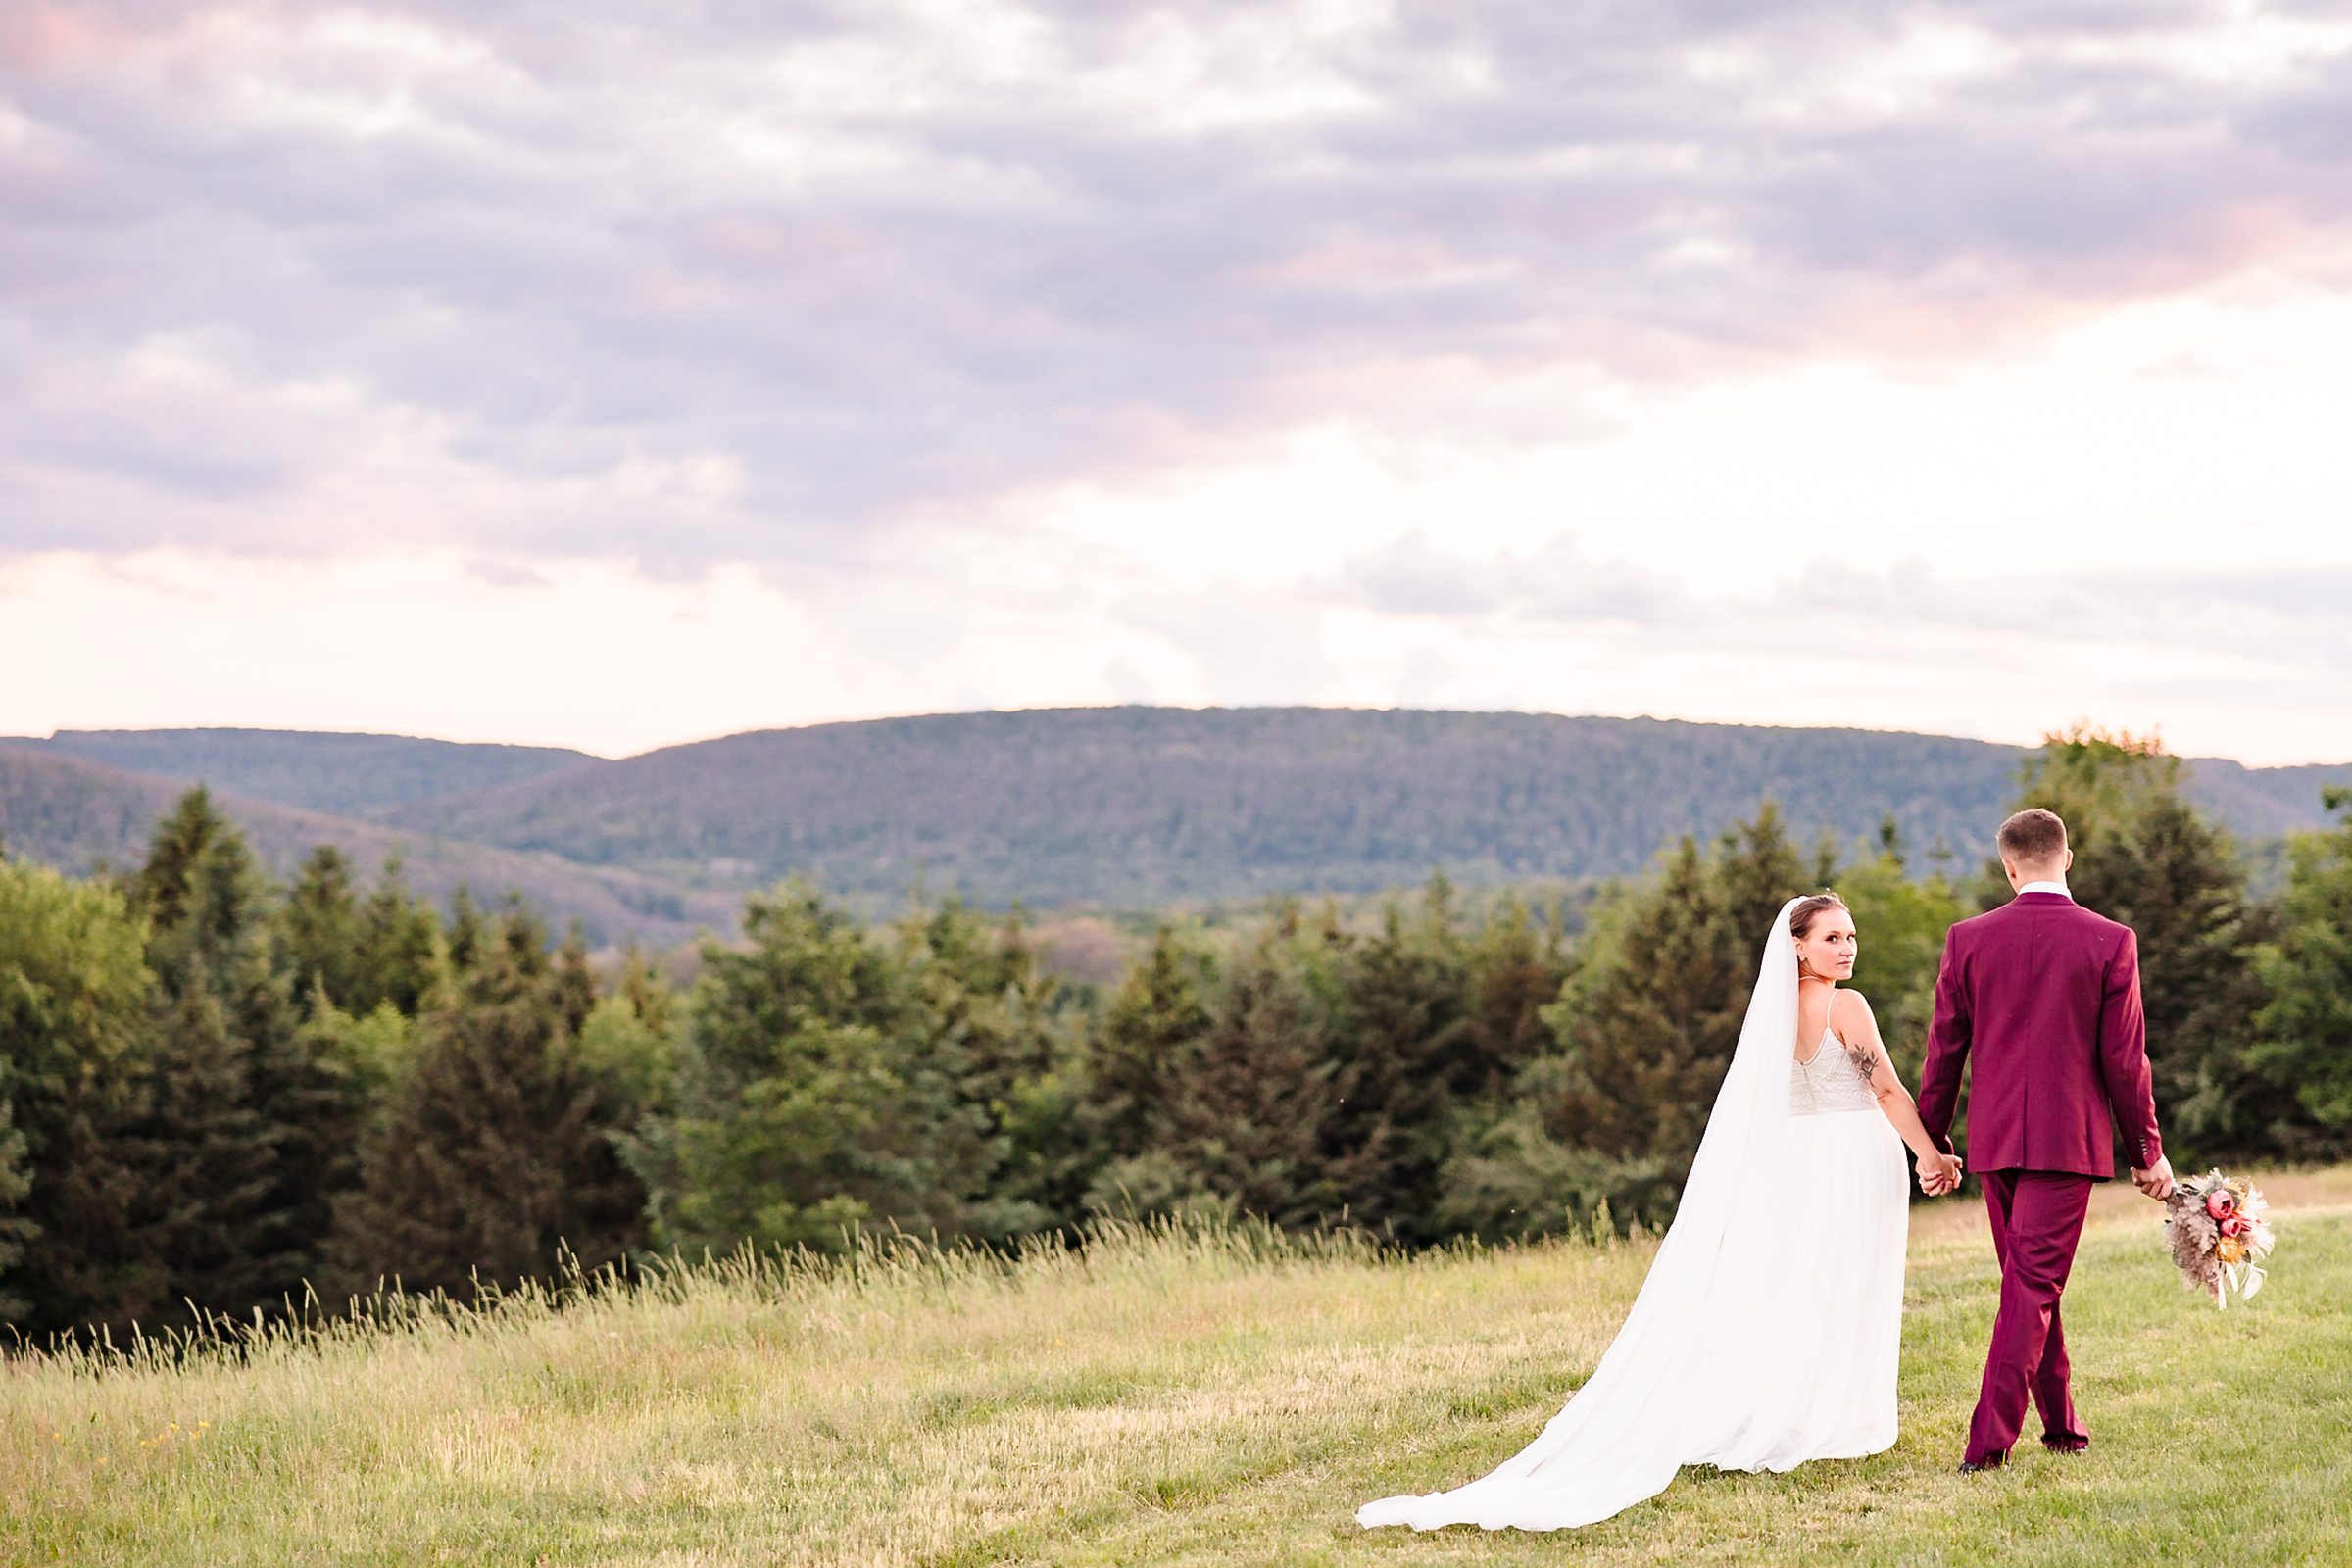 Bride and Groom celebrate getting married at the Wren's Roost Barn Venue in Naples, New York.